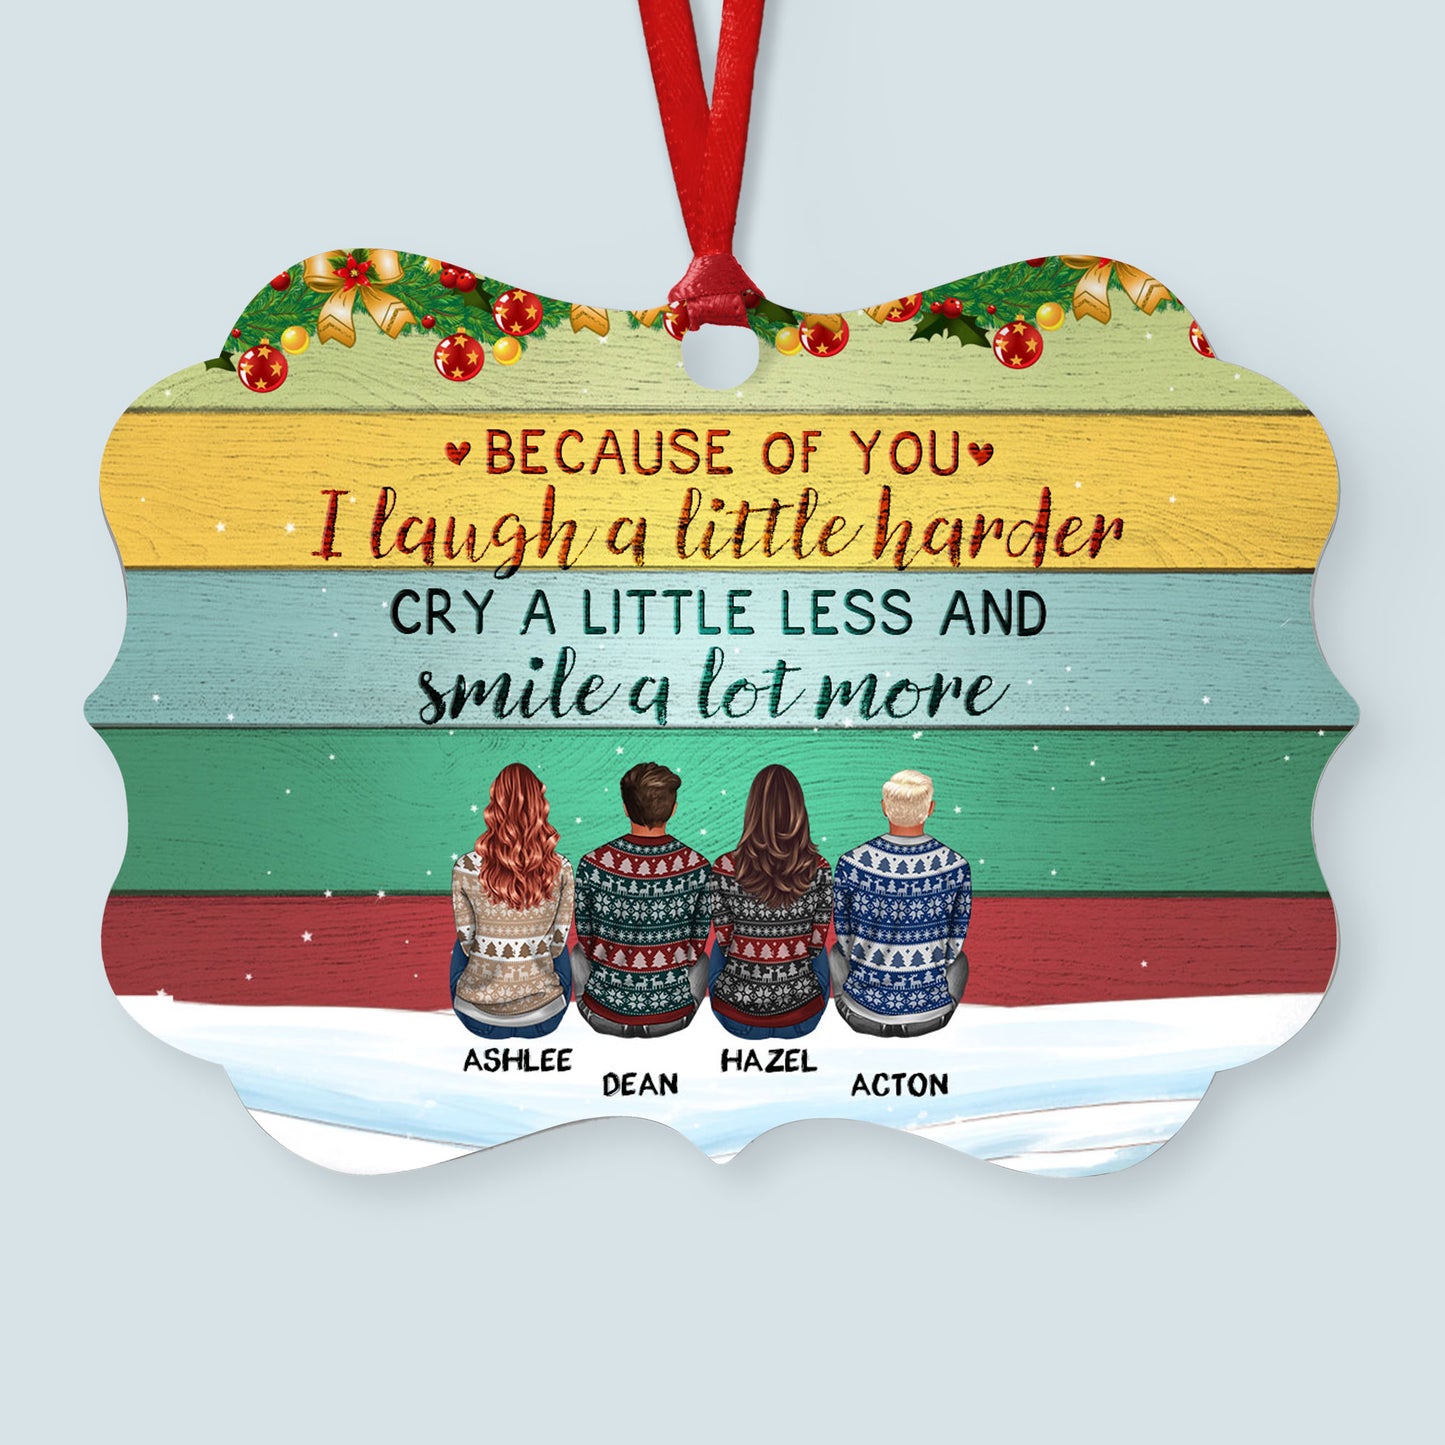 Because Of You I Laugh A Little Harder - Personalized Aluminum Ornament - Christmas Gift For Brothers, Sisters, Family Members - Ugly Christmas Sweater Sitting